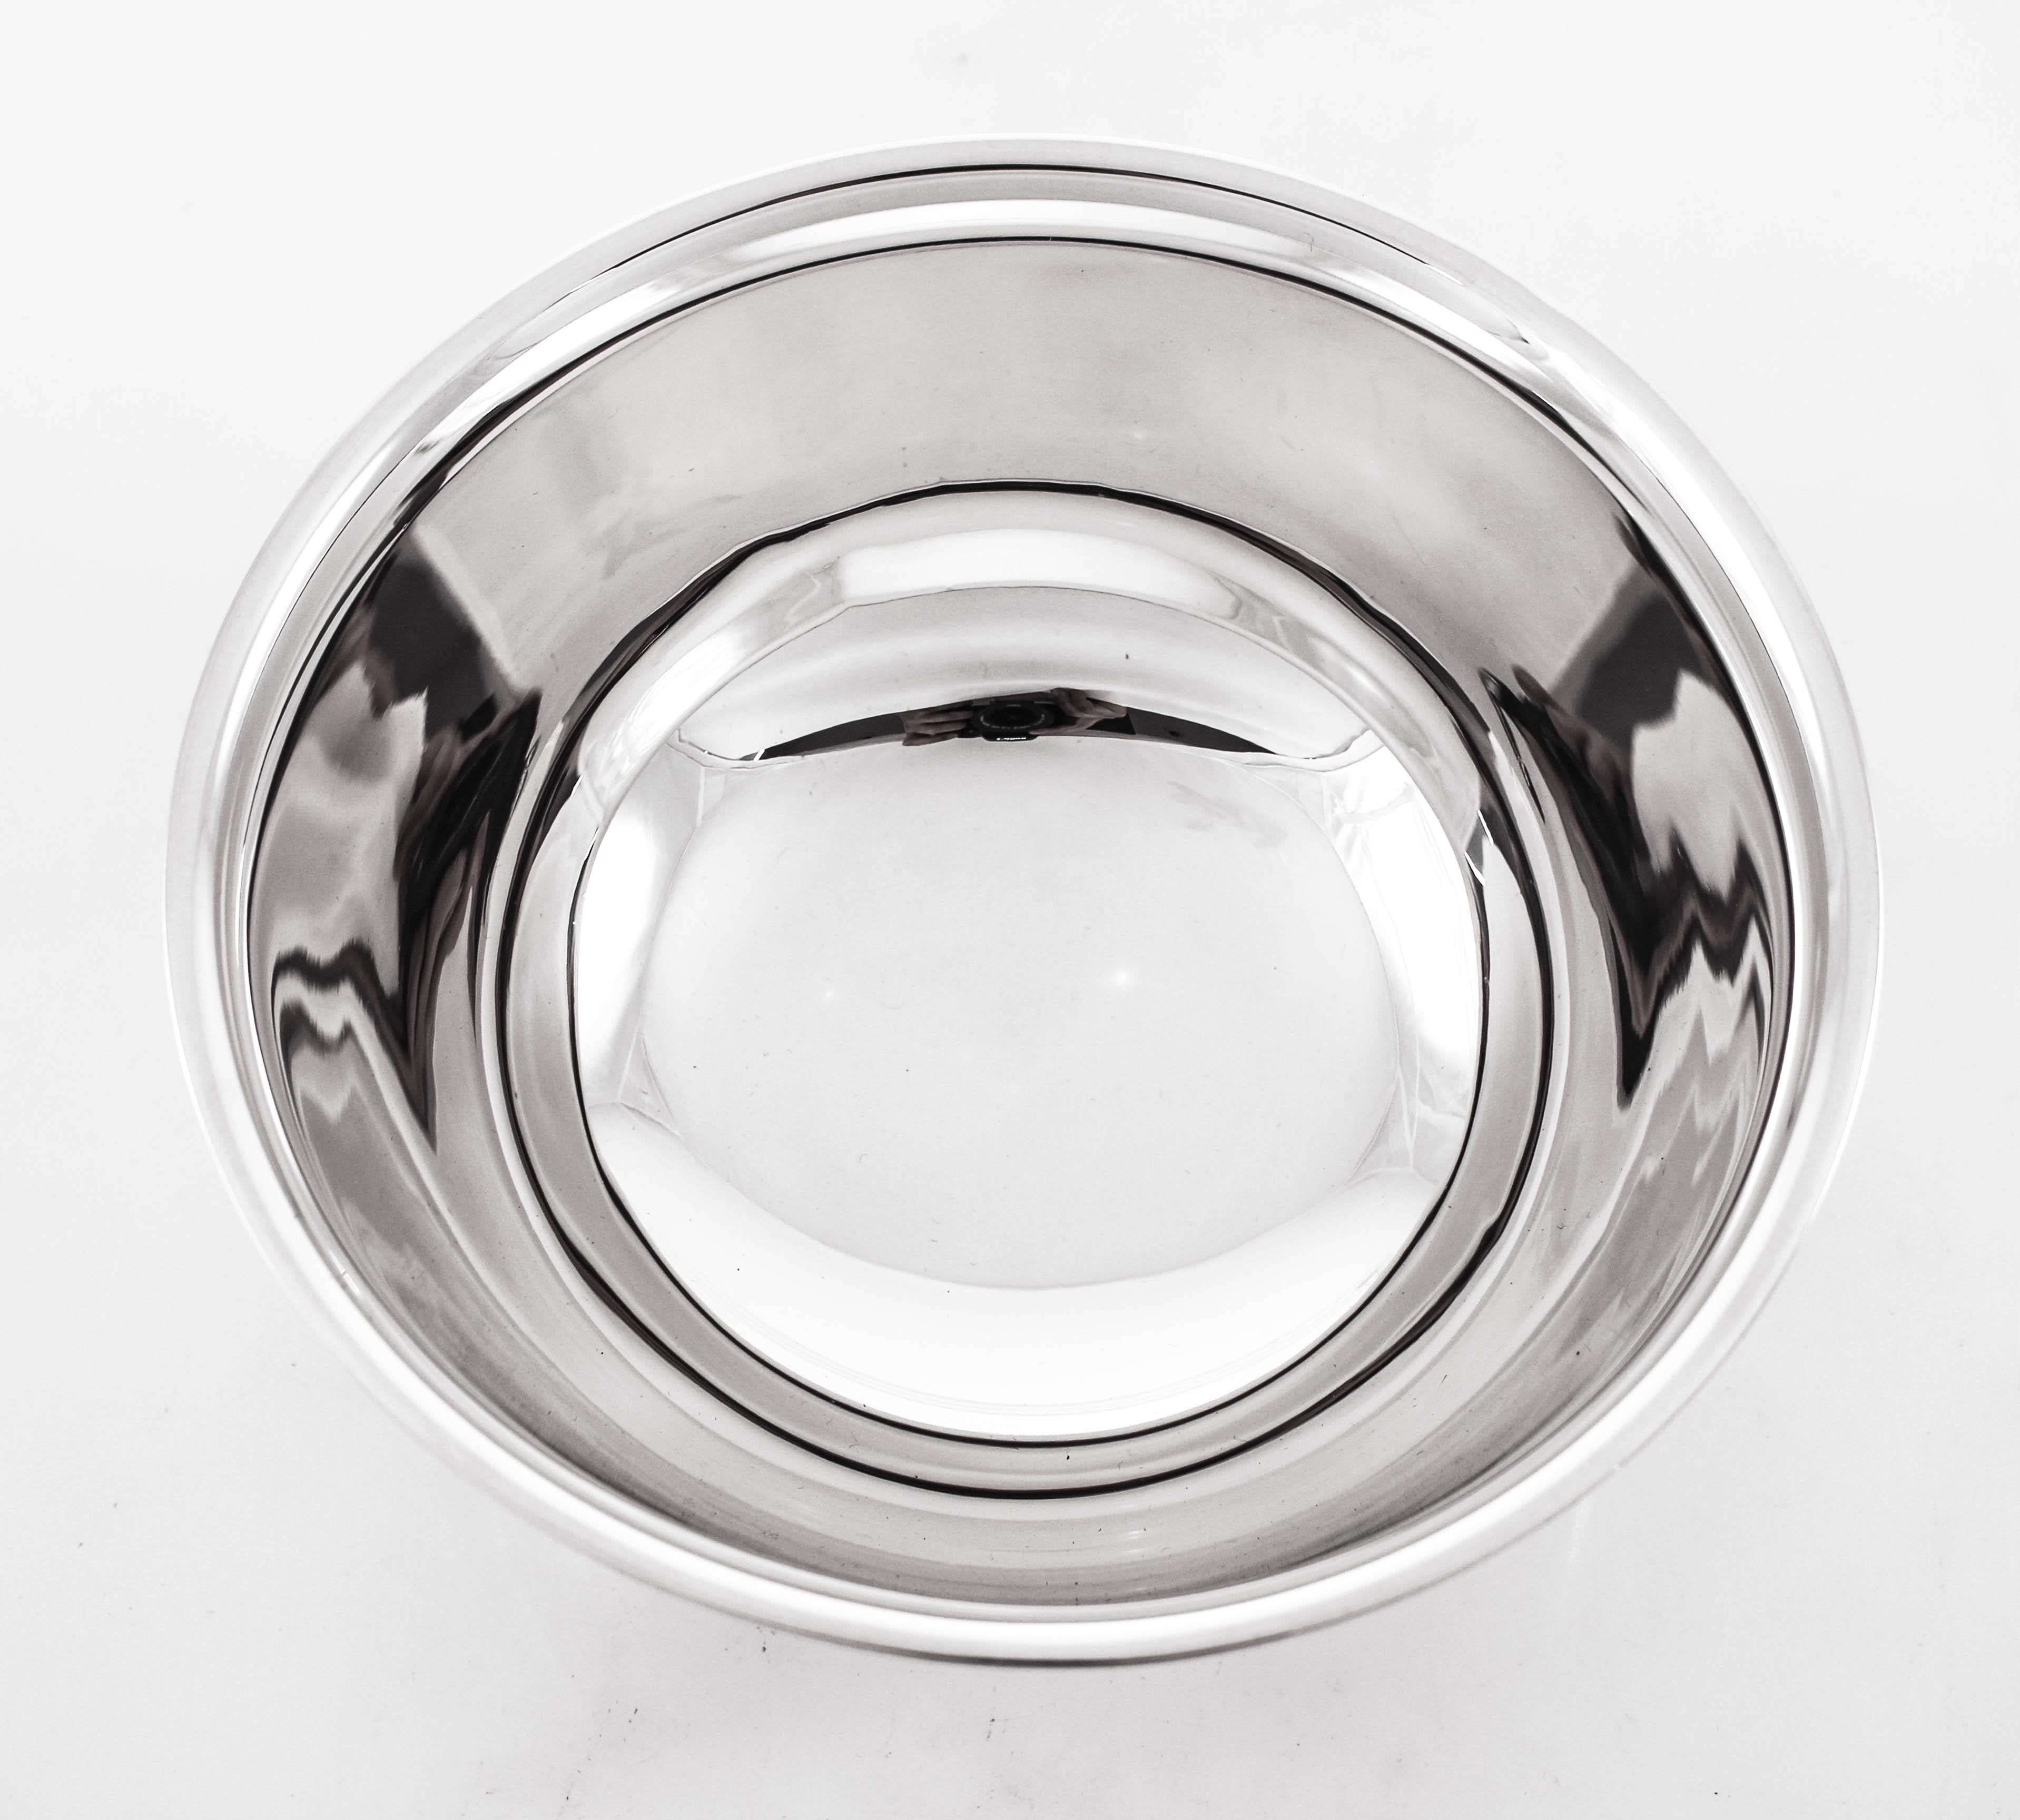 This sterling silver bowl was made during WWII by Lunt Silversmiths. It was a period of restraint in spending and in luxury items. “Less was more” and opulence was not in fashion. This is reflected in the architecture and styles of that period. This